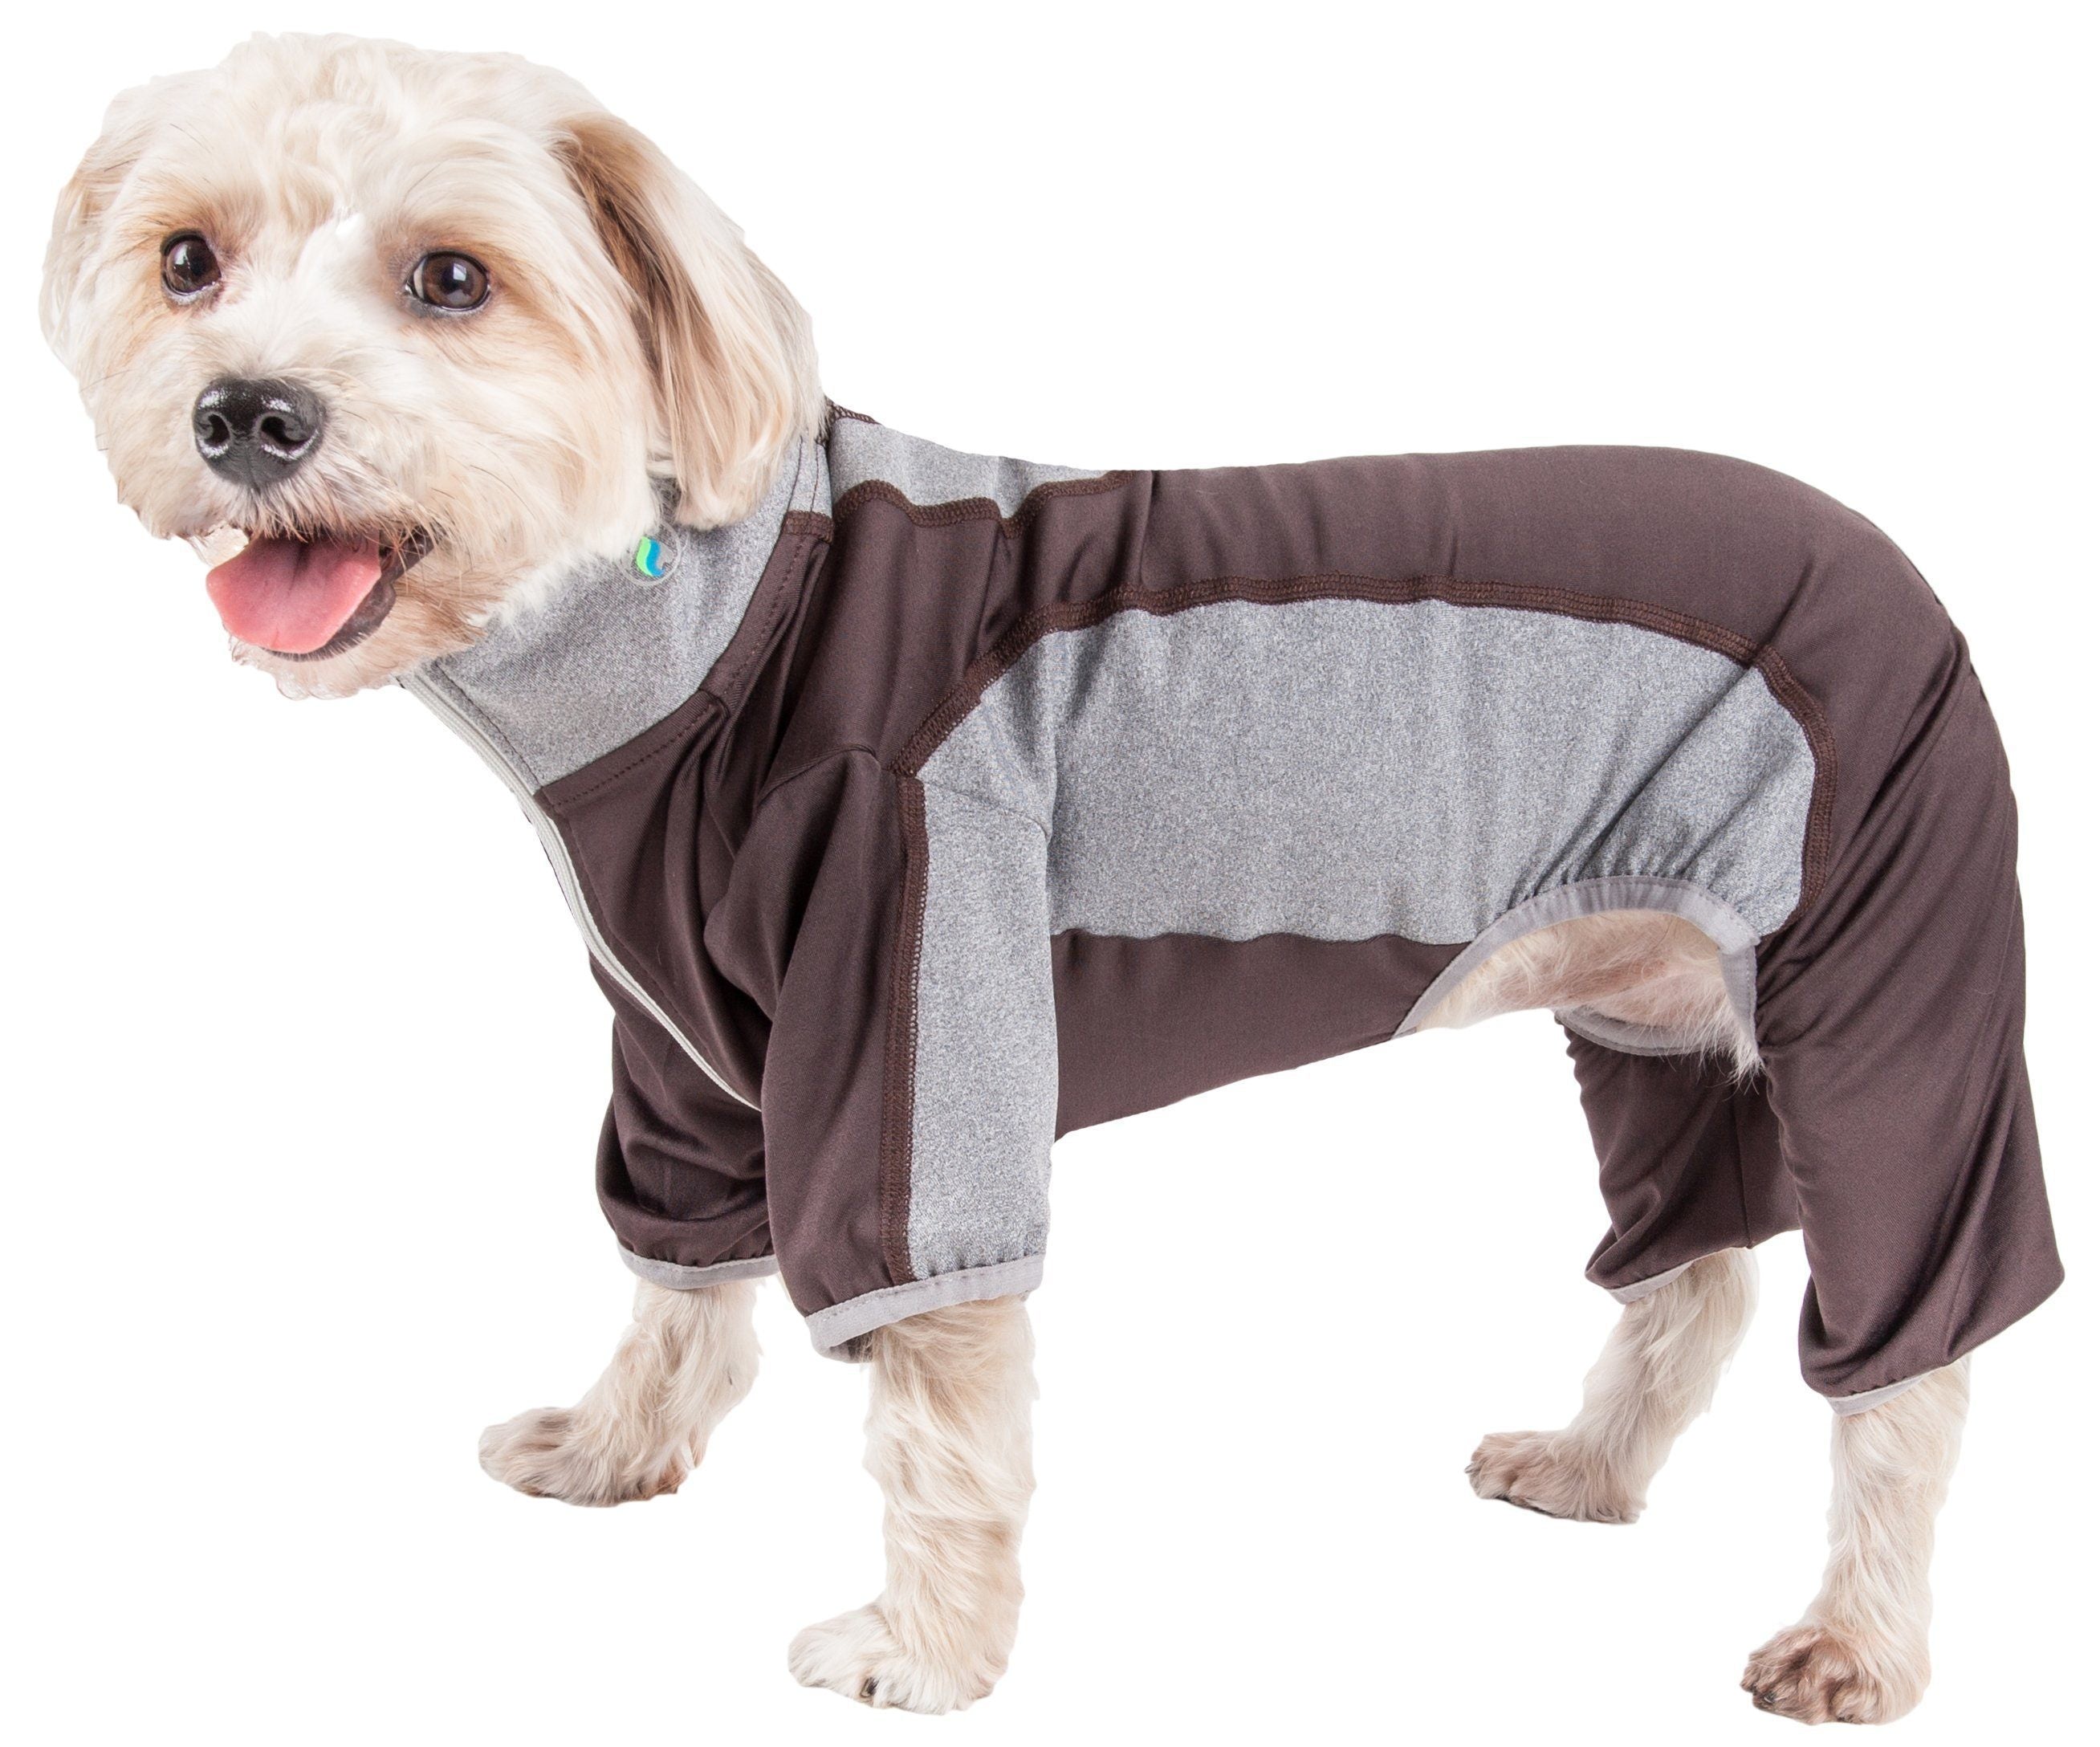 Pet Life ® Active 'Warm-Pup' Stretchy and Quick-Drying Fitness Dog Yoga Warm-Up Tracksuit X-Small Mudd Brown and Gray